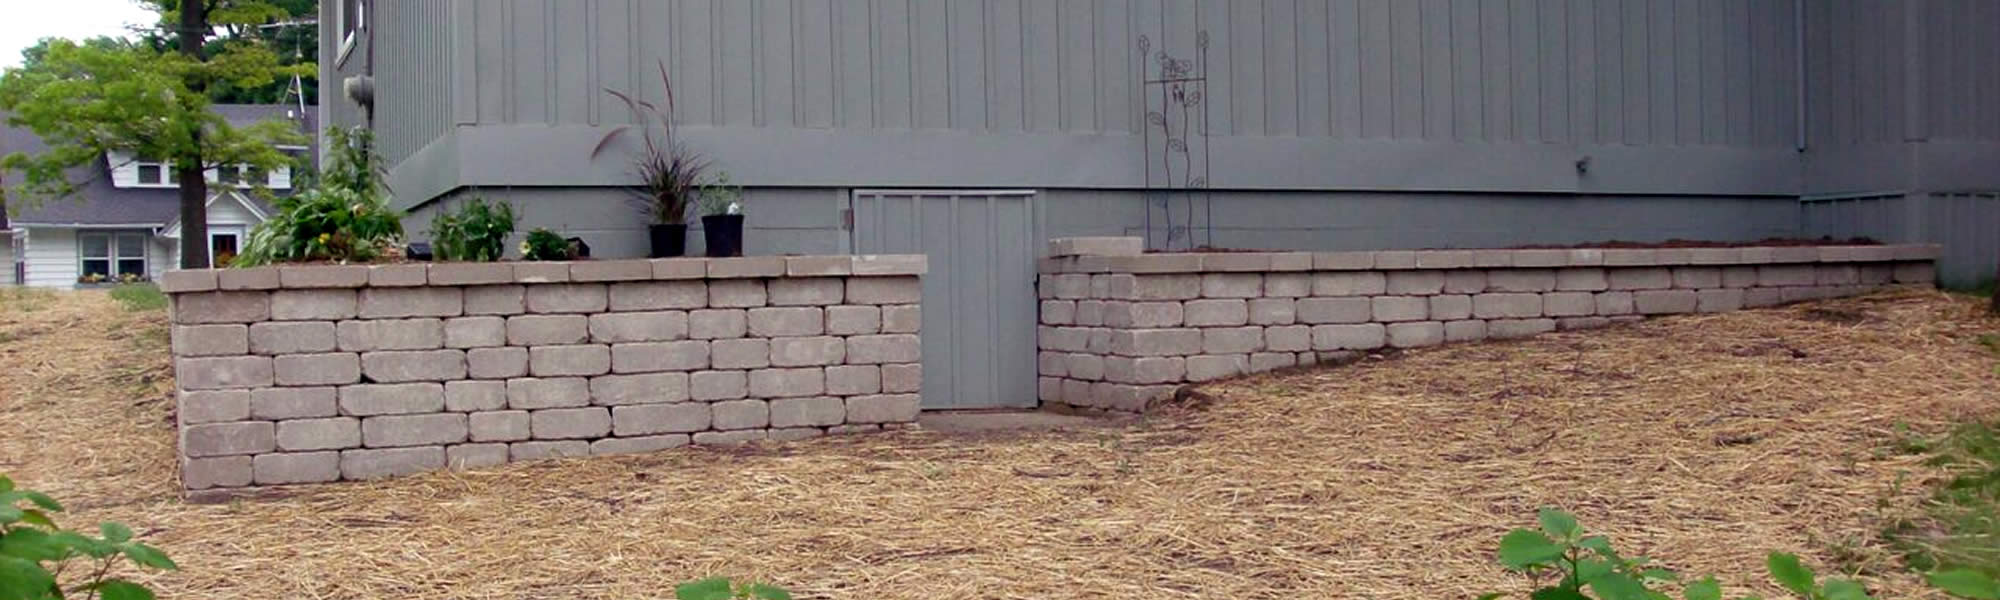 Retaining Wall Construction Services